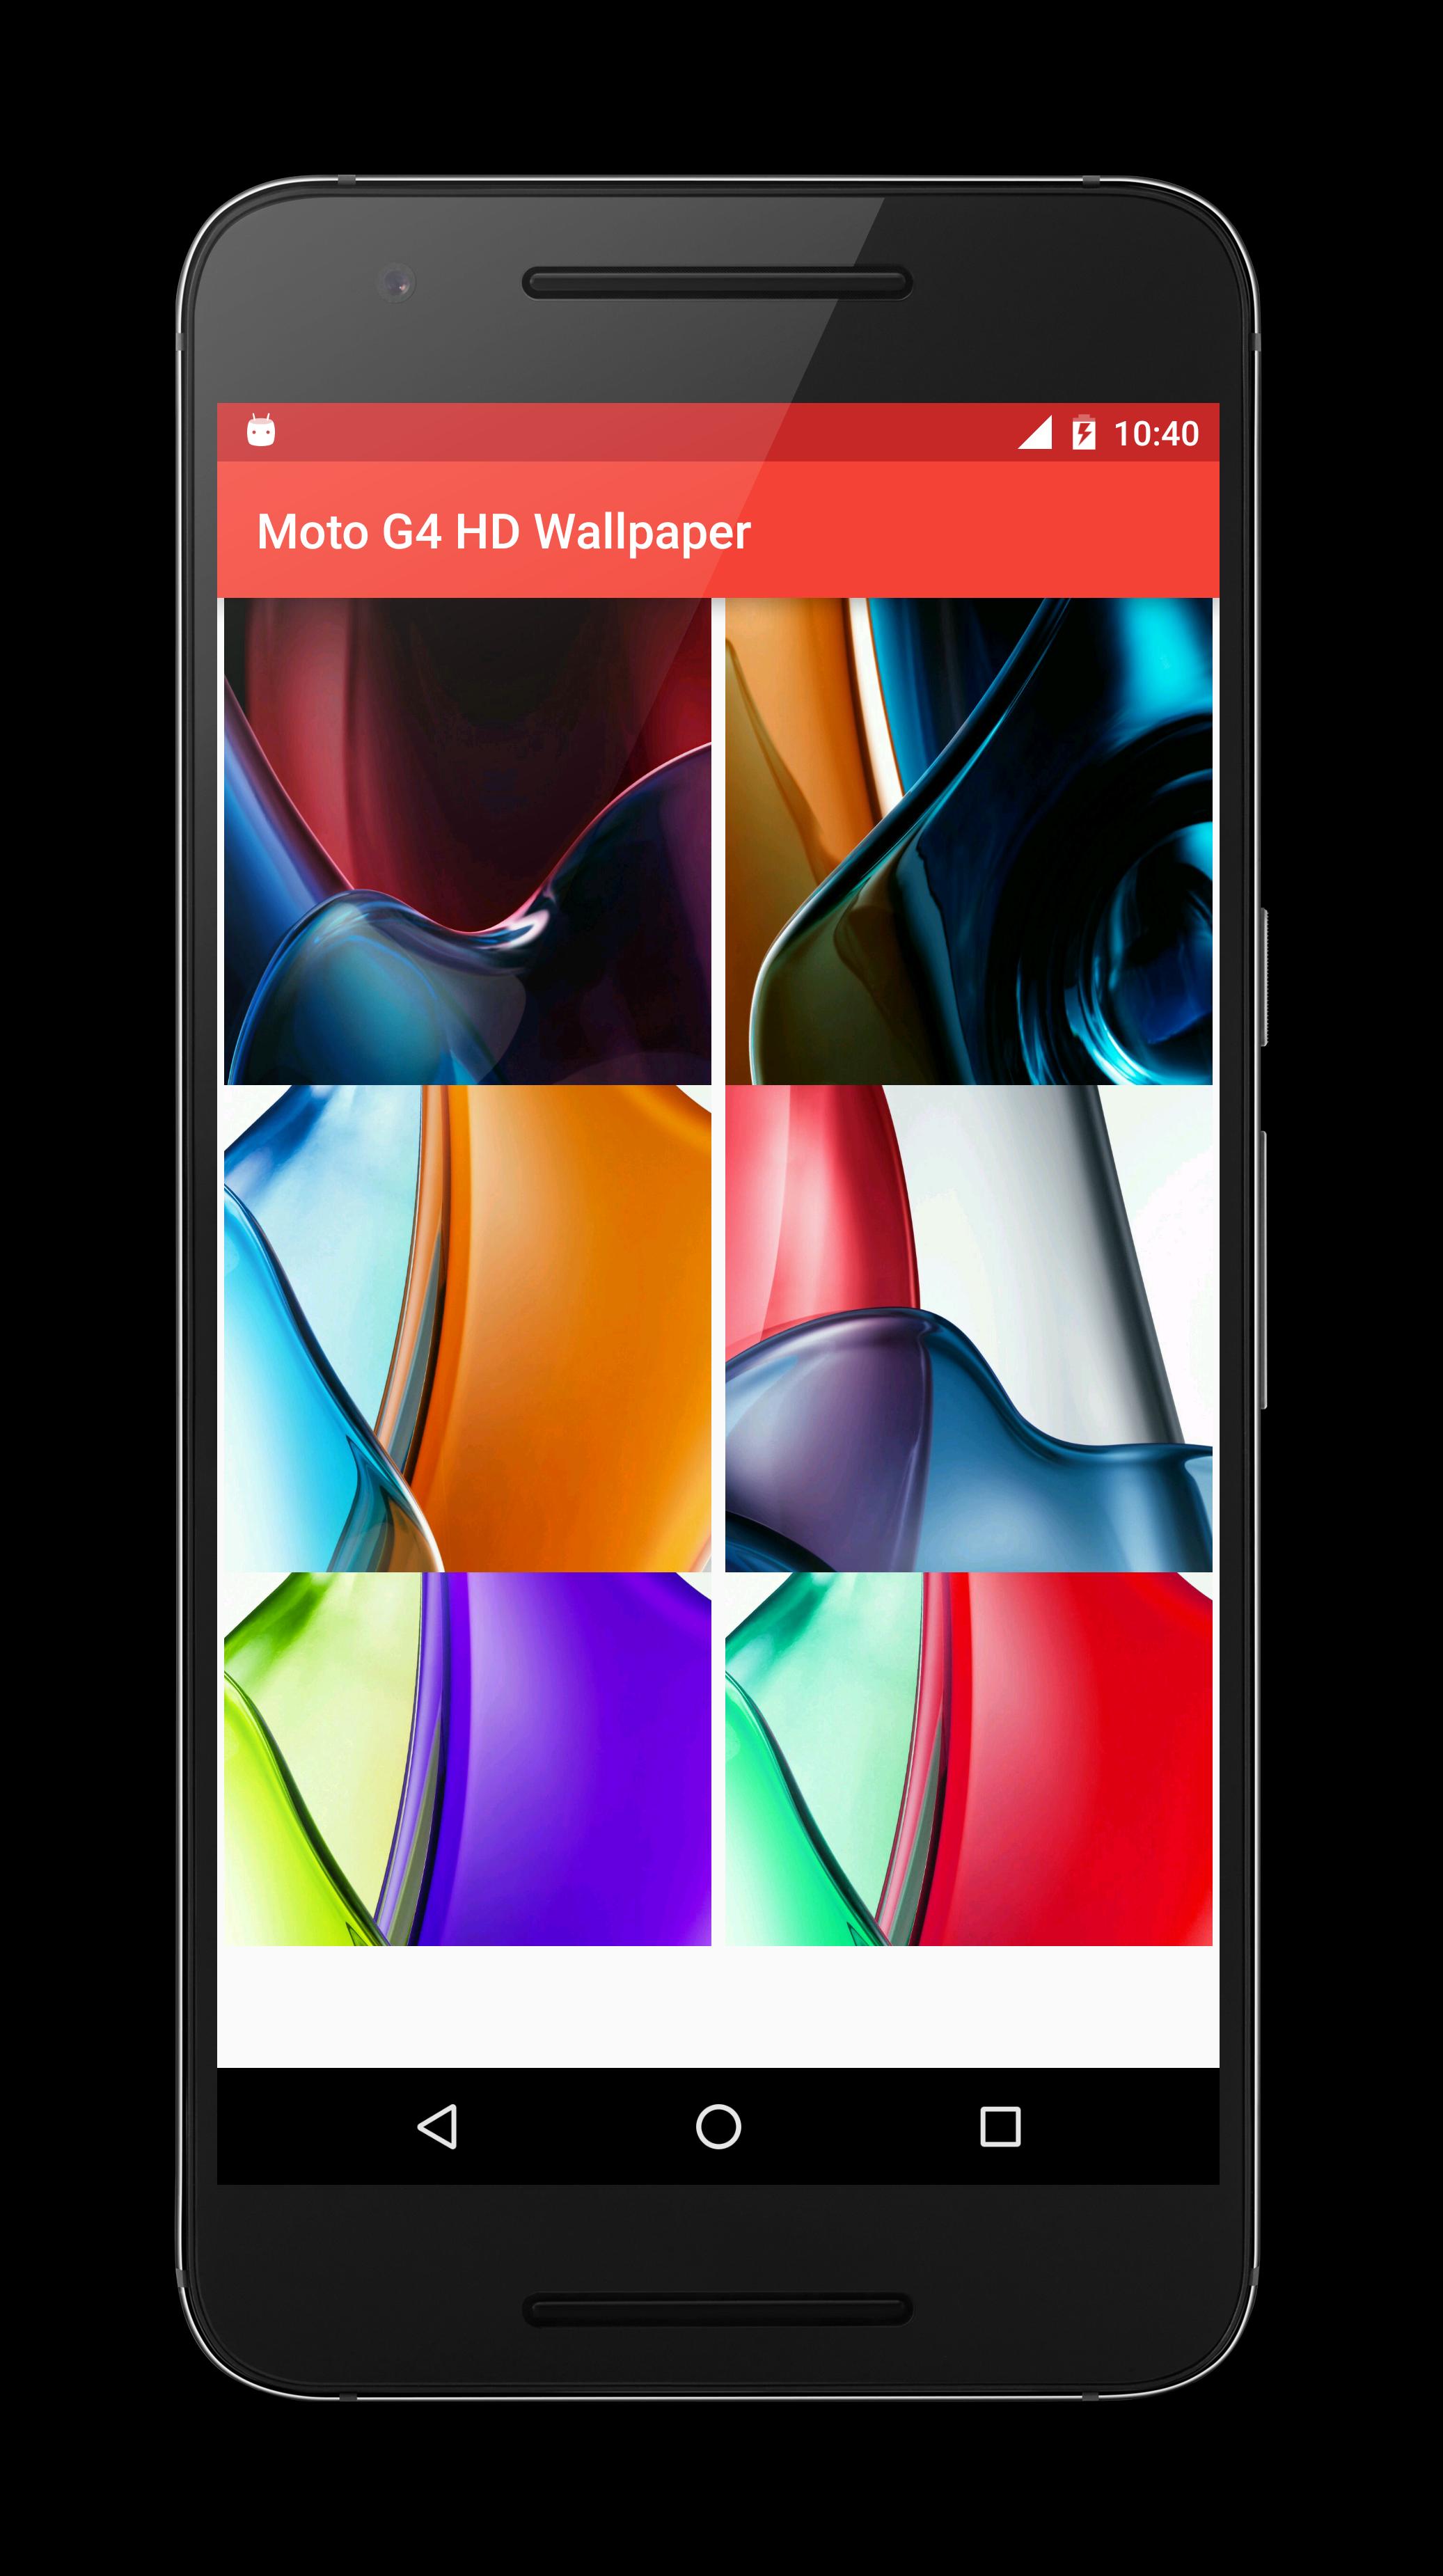 Moto G4 HD Wallpaper for Android - APK Download